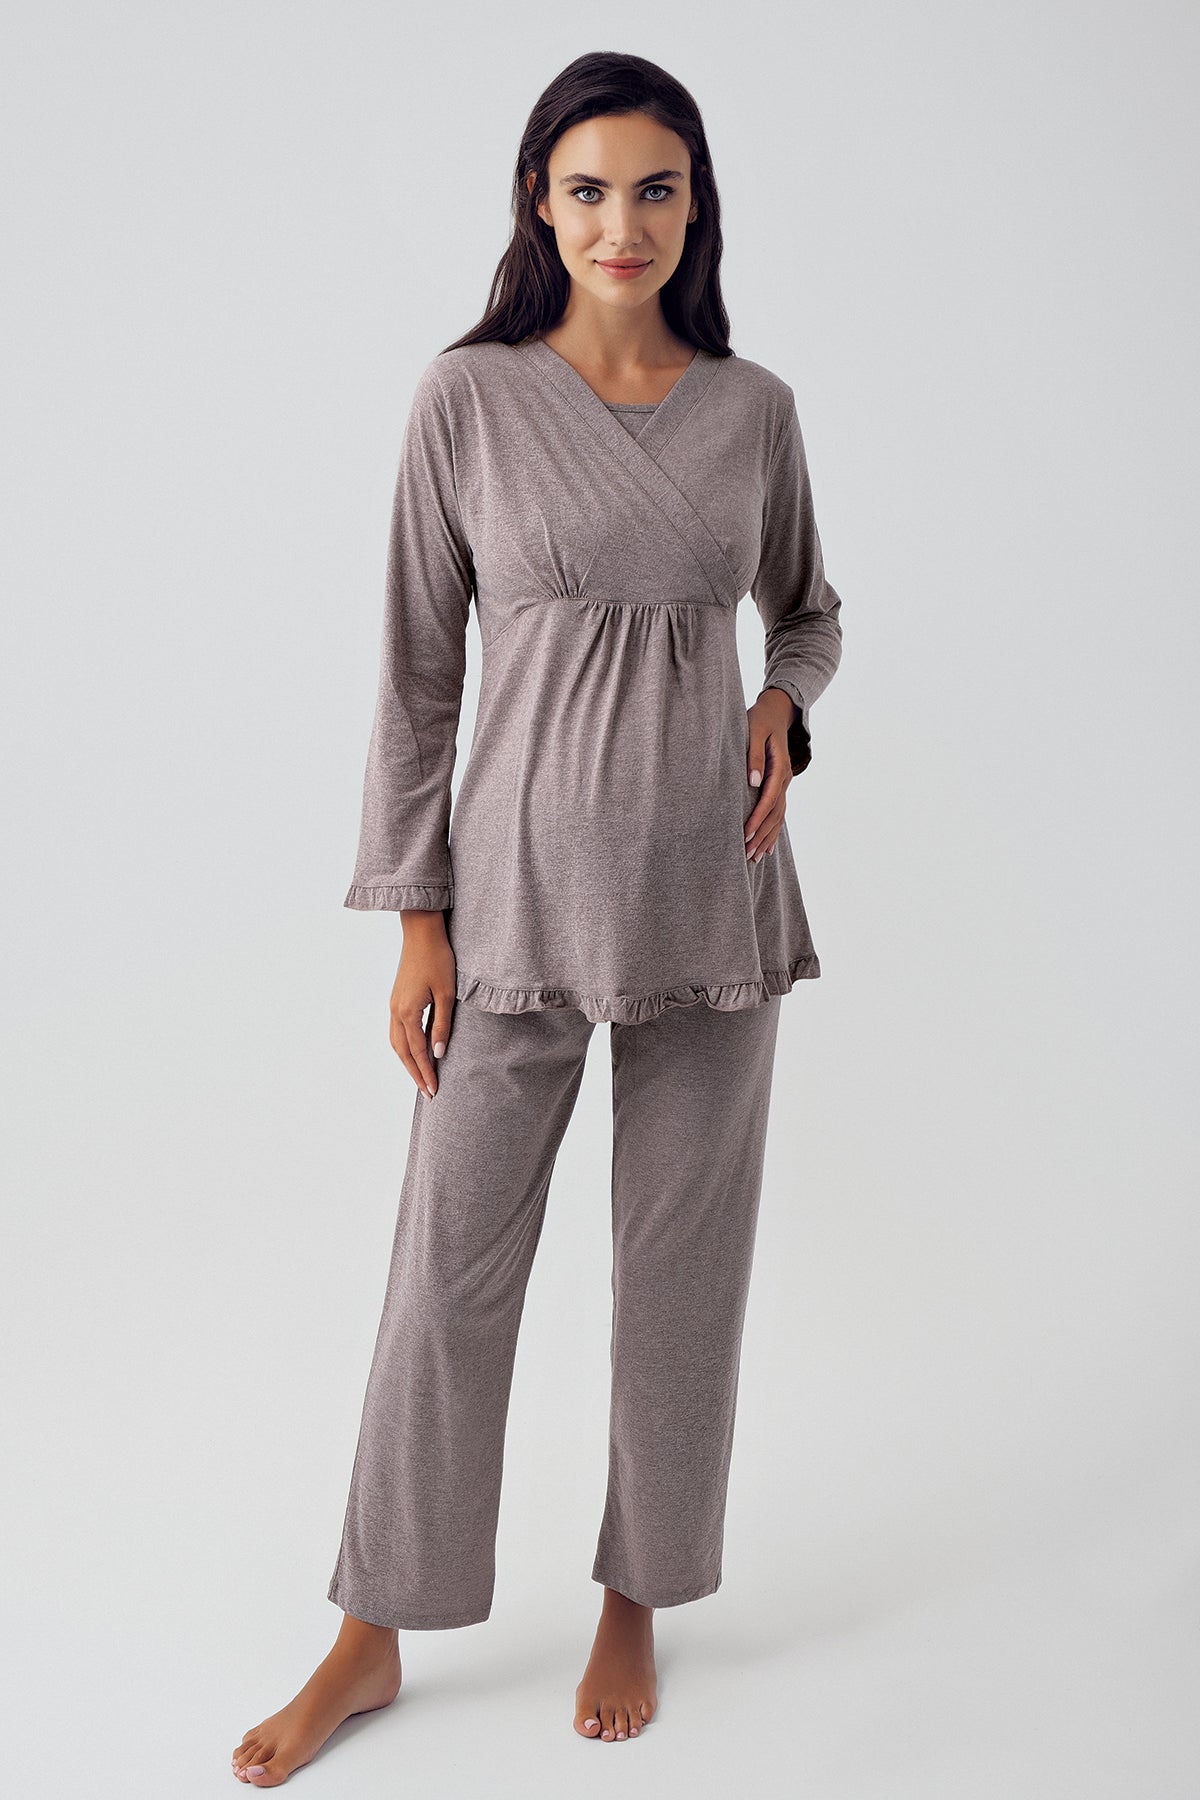 Double Breasted 3-Pieces Maternity & Nursing Pajamas With Knitwear Robe Coffee - 15301